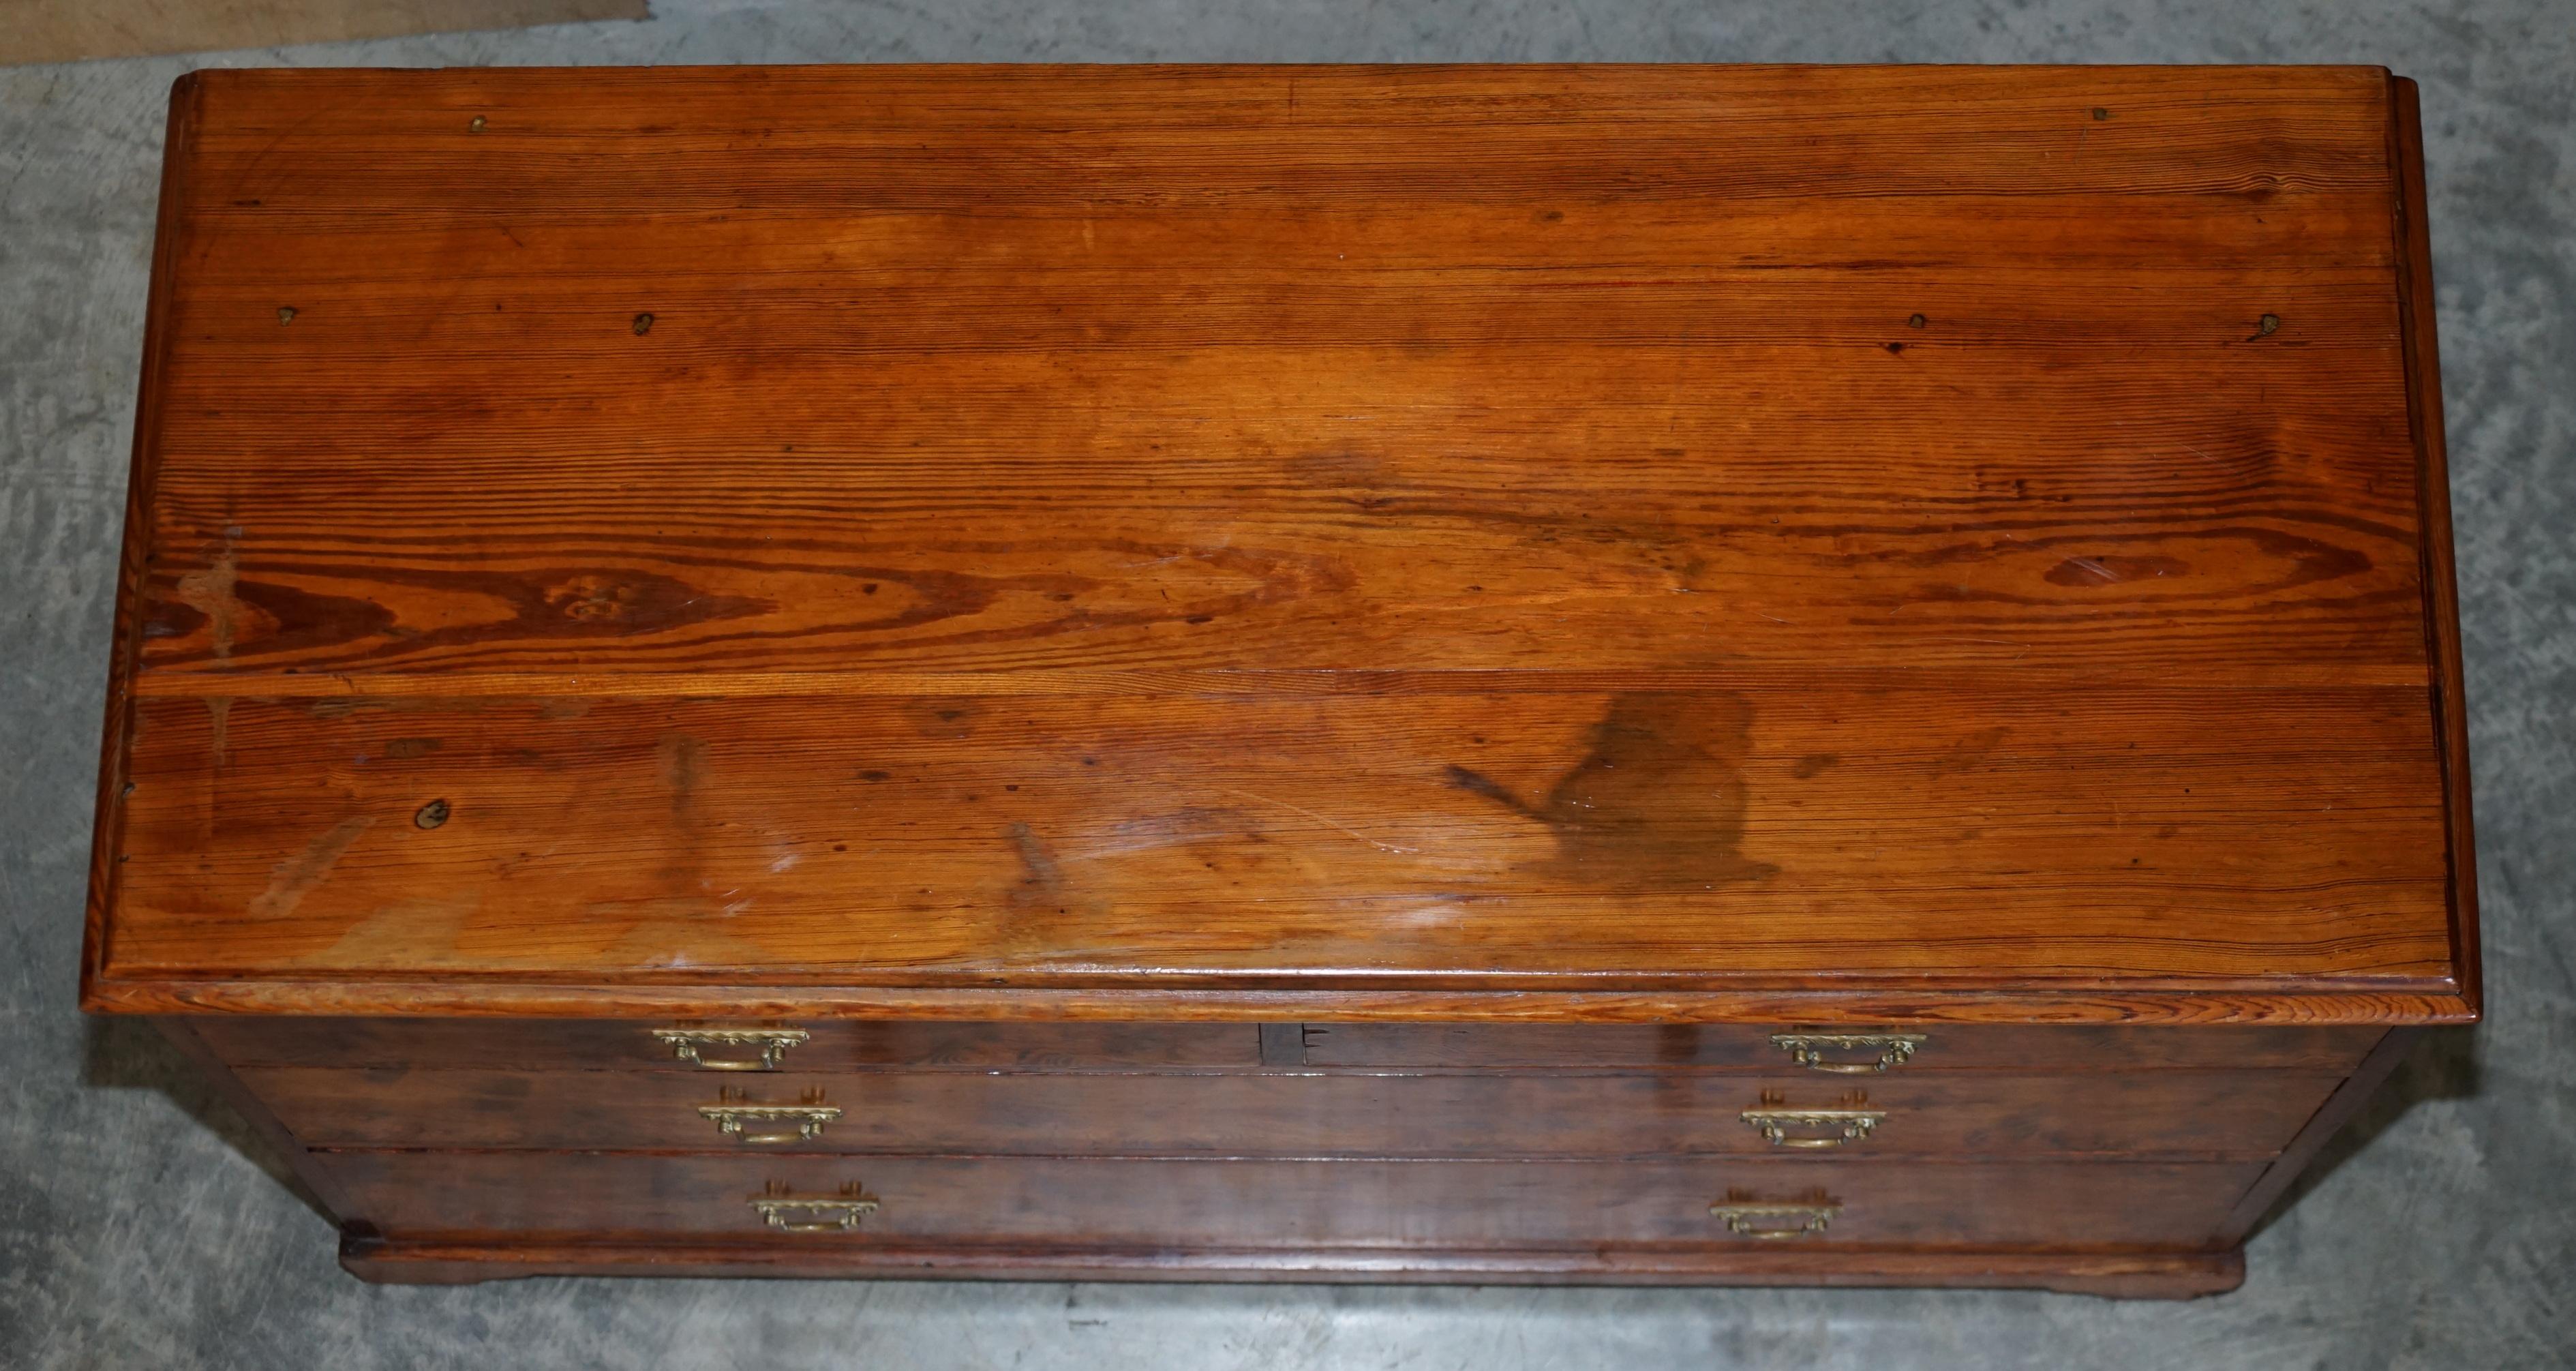 Sublime Patina circa 1880 Pitch Pine Chest of Drawers Must See Timber Grain!!!!! For Sale 1